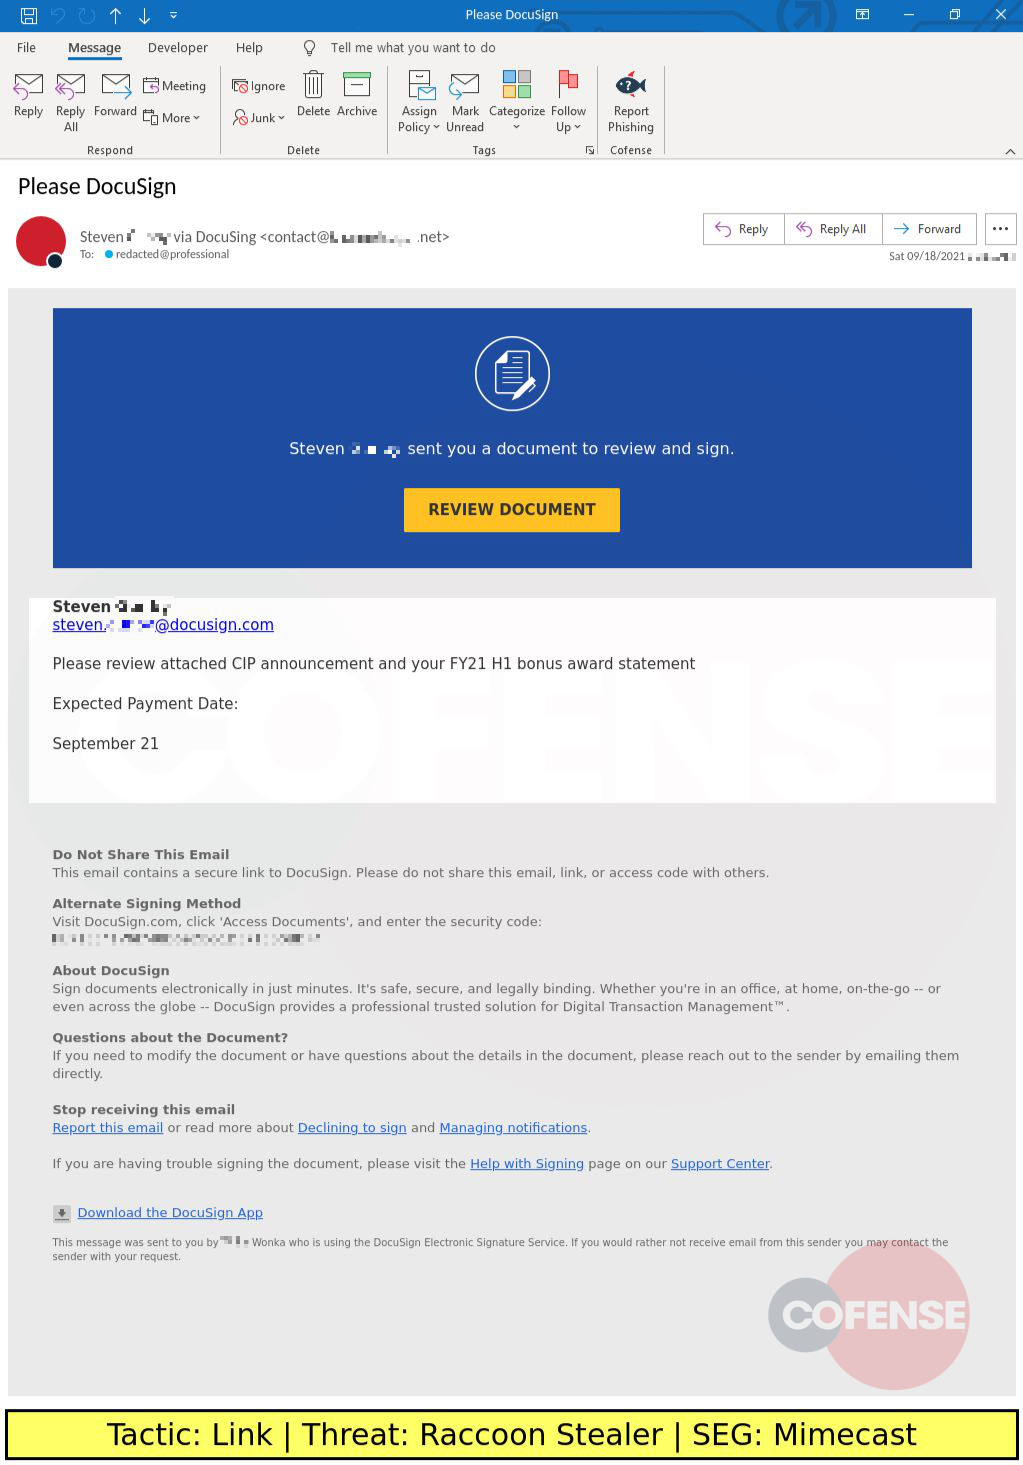 Real Phishing Example: DocuSign-spoofing emails found in environments protected by Mimecast deliver a Malware Downloader via an embedded URL. The Malware downloader drops a legitimate wget binary and uses it to download Raccoon Stealer.